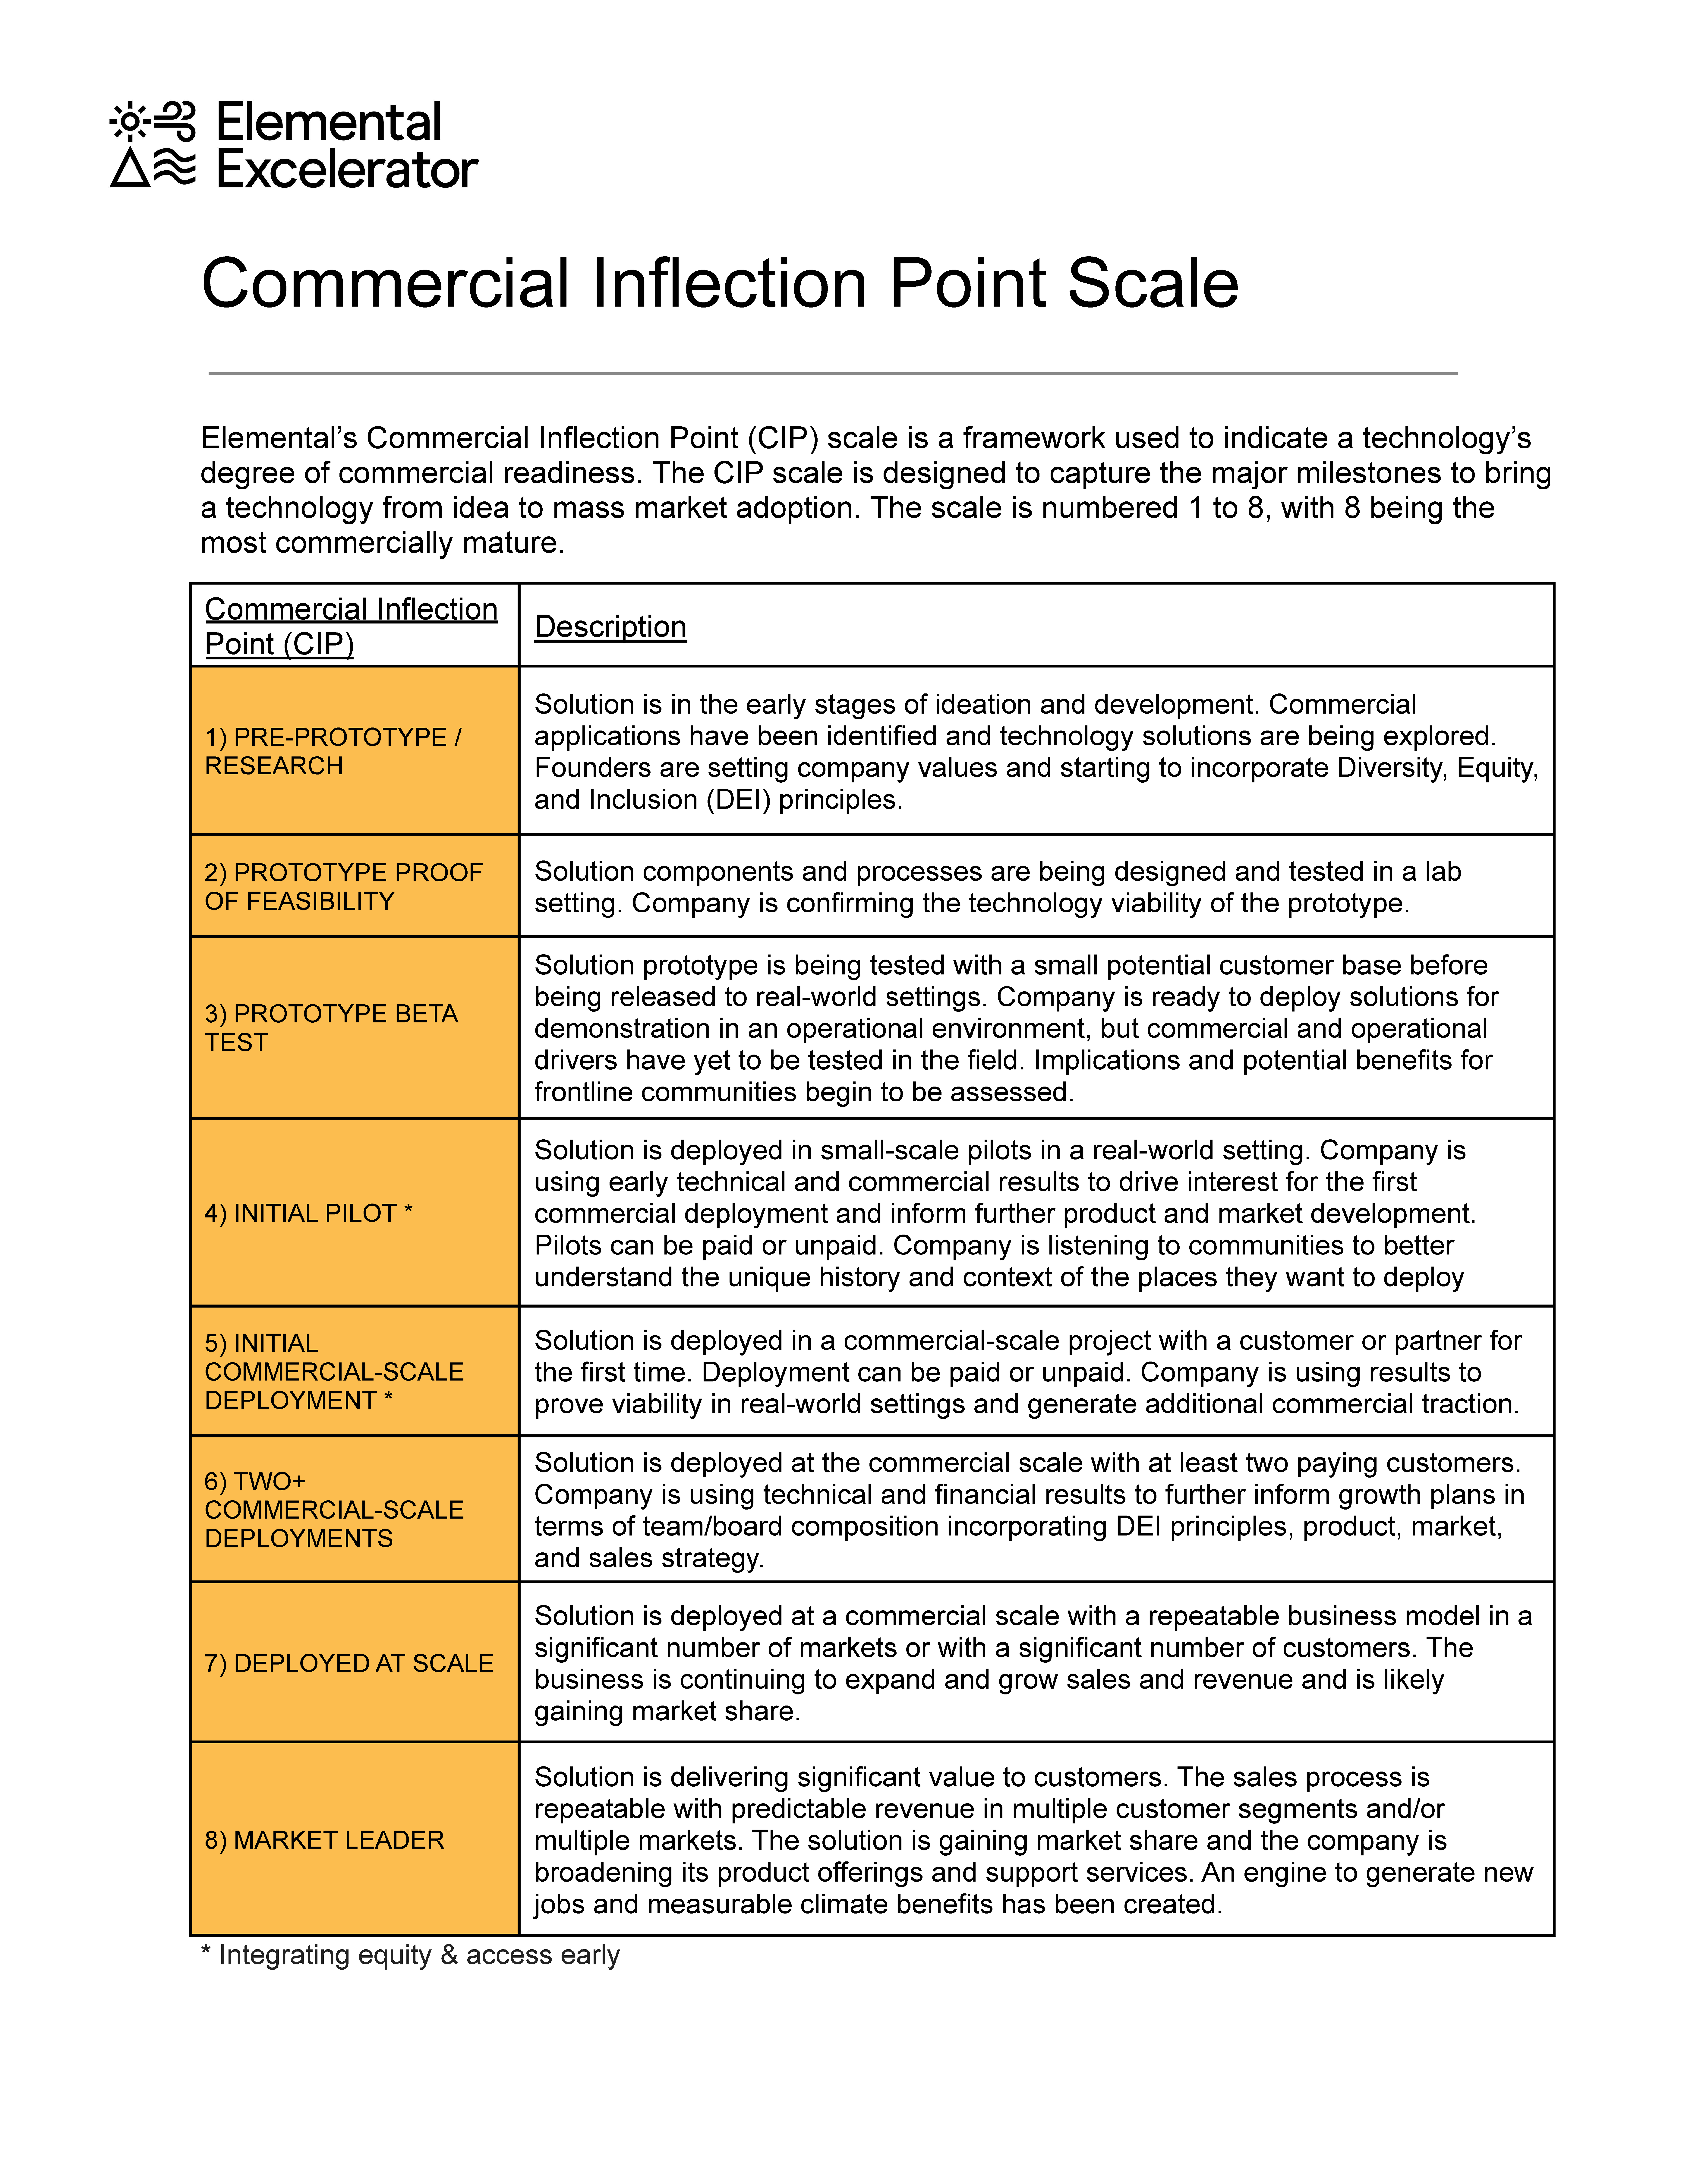 Commercial inflection point scale